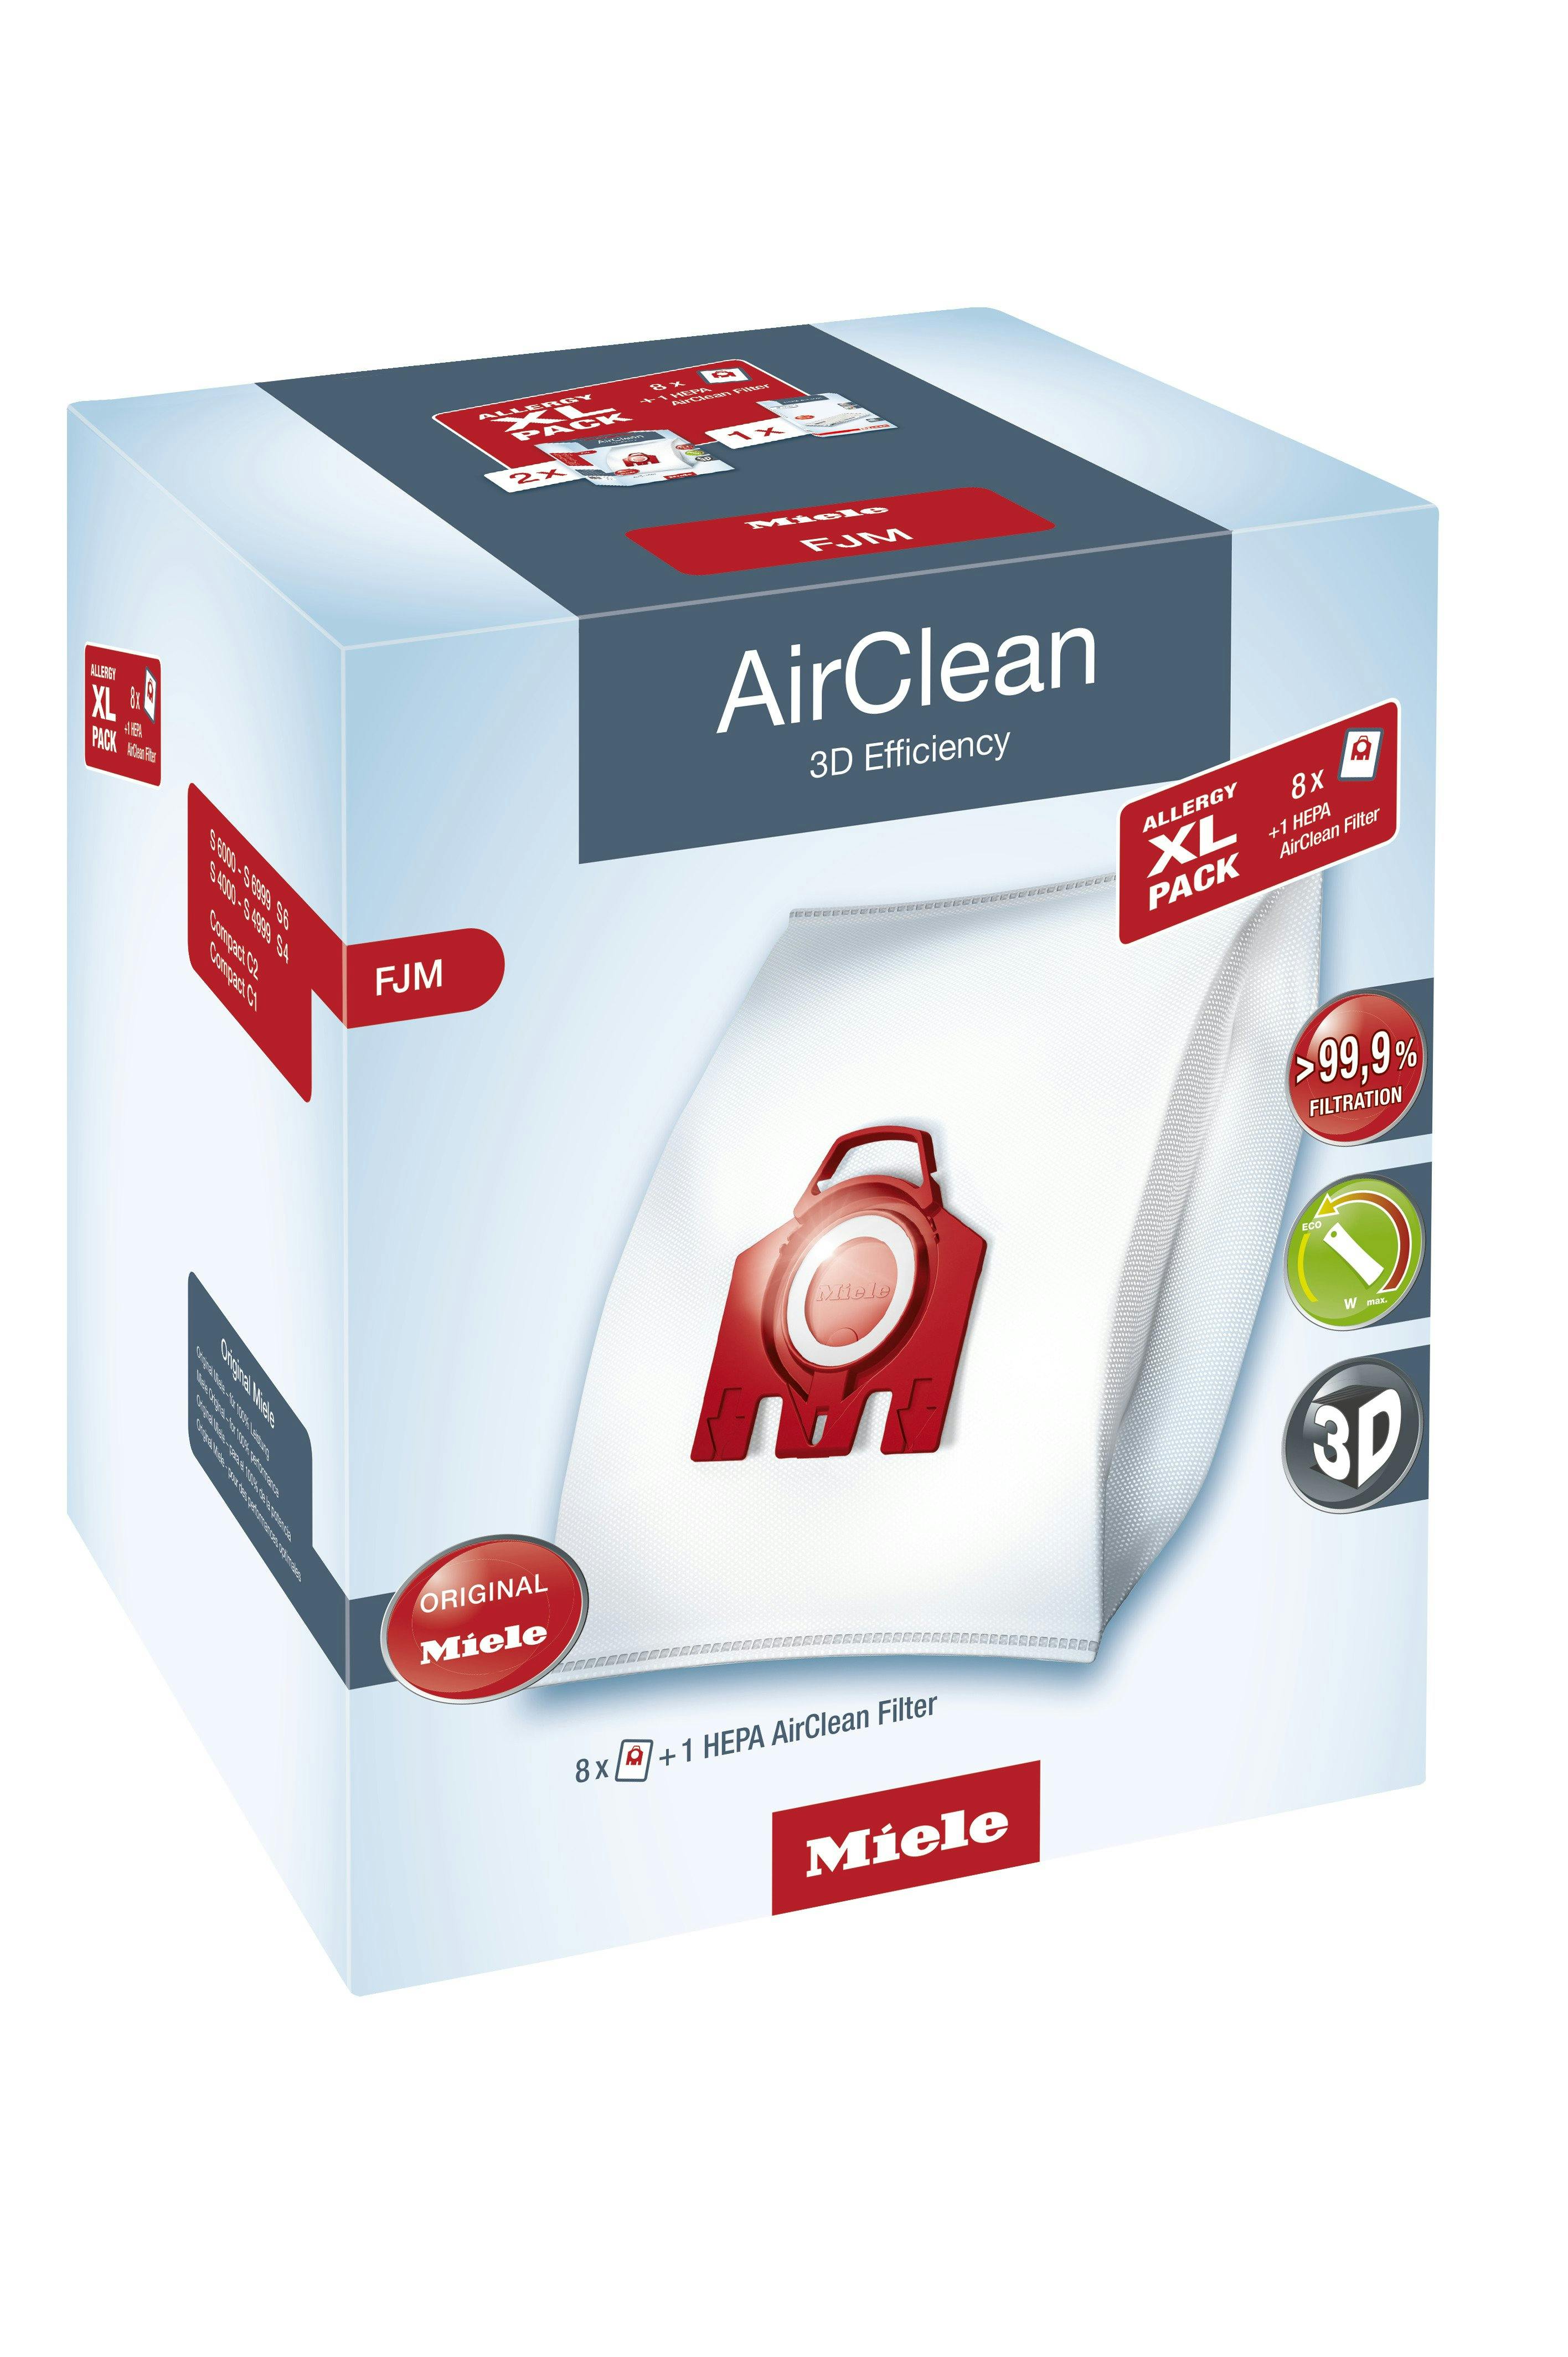 Miele FJM XL Pack AirClean 3D Efficiency Filter Bags with HEPA Filter